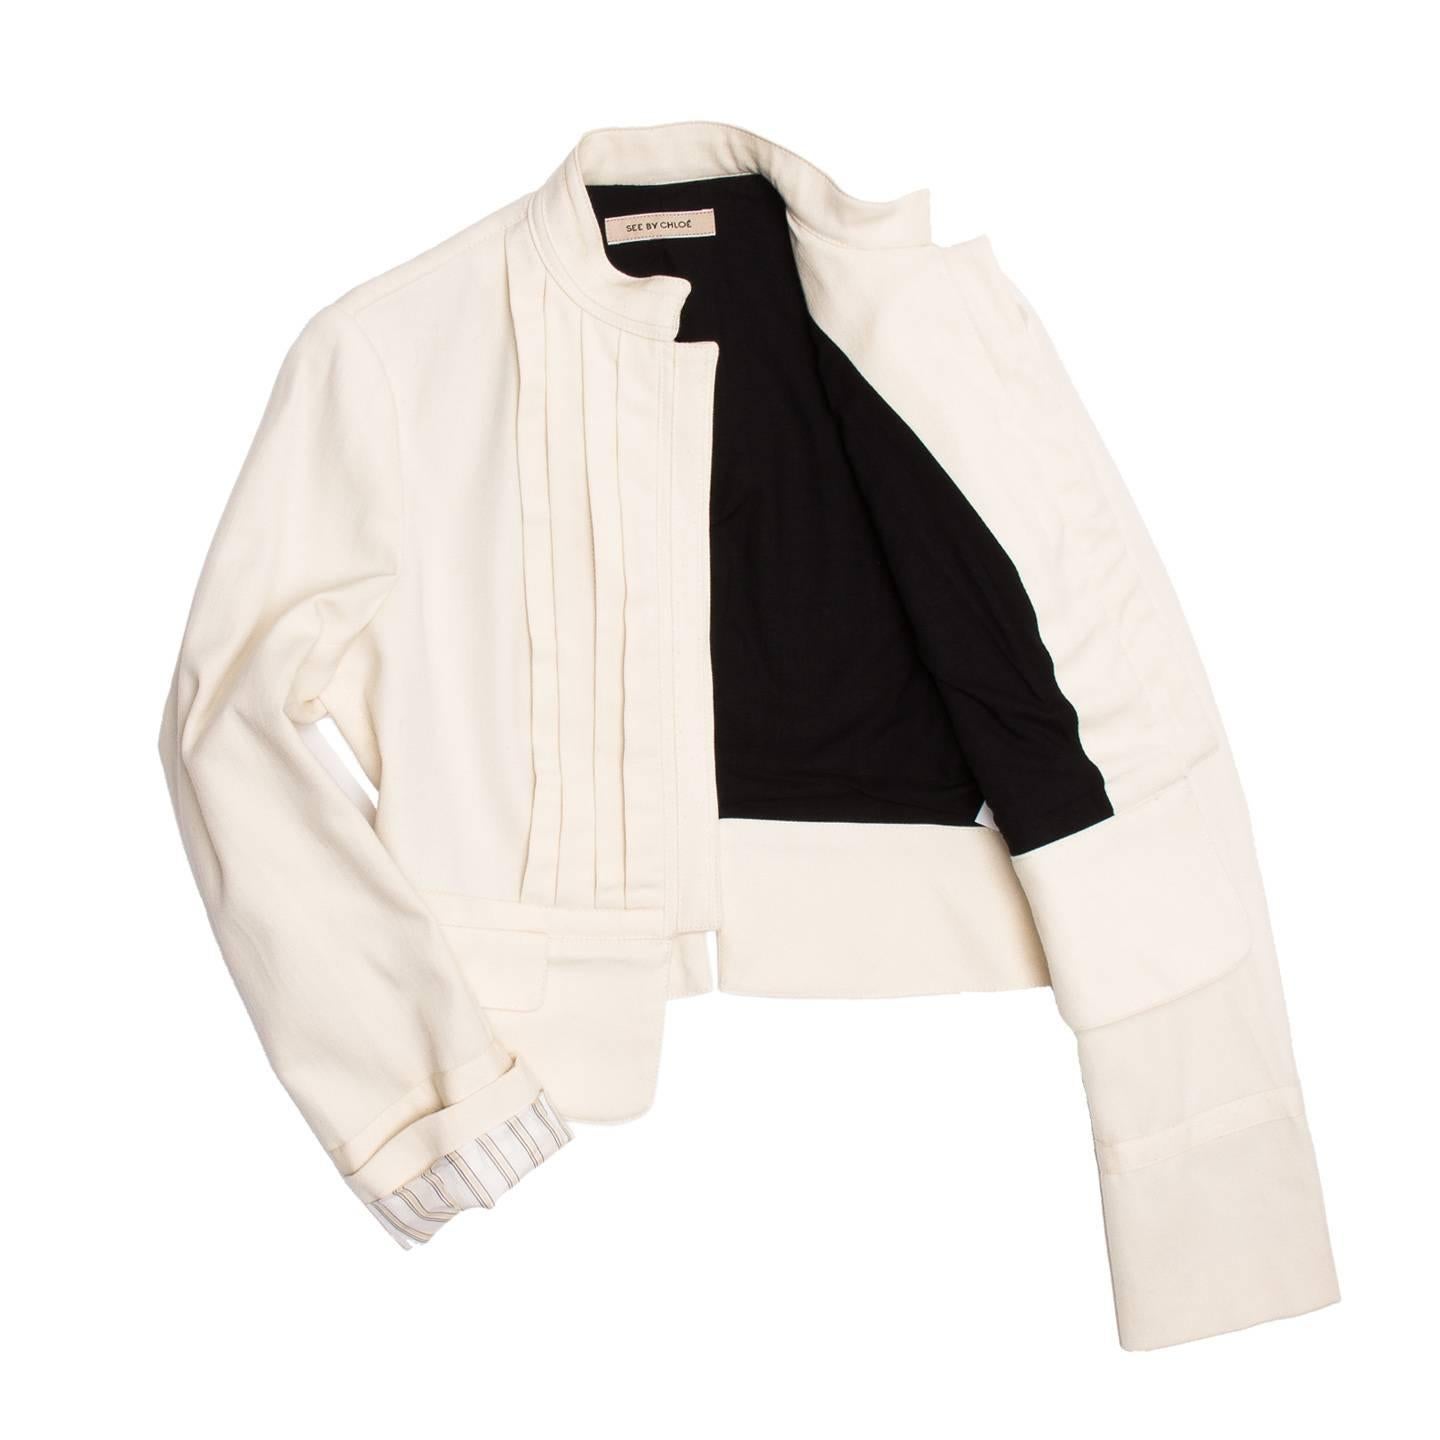 See by Chloe' Cream Bellboy Cut Jacket In Excellent Condition For Sale In Brooklyn, NY